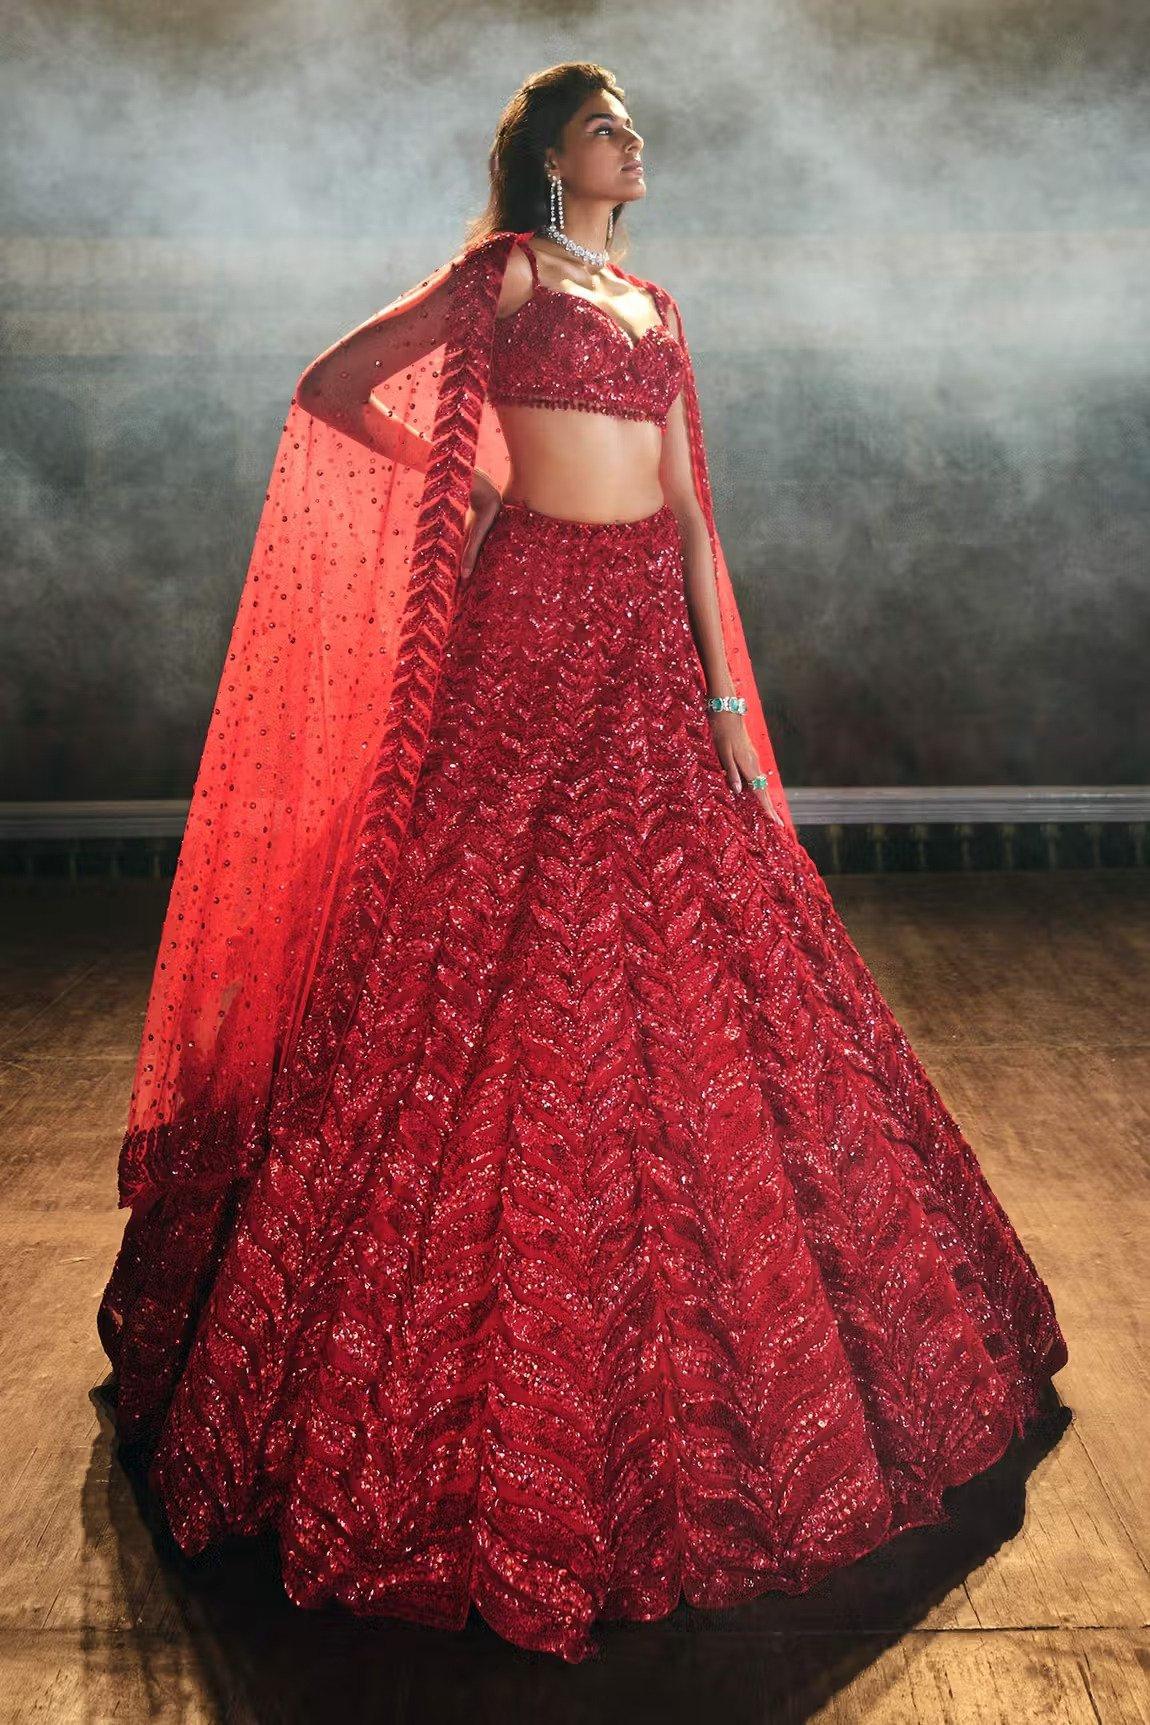 Here's How To Make A Simple Lehenga For Party With Your Bridal Outfit